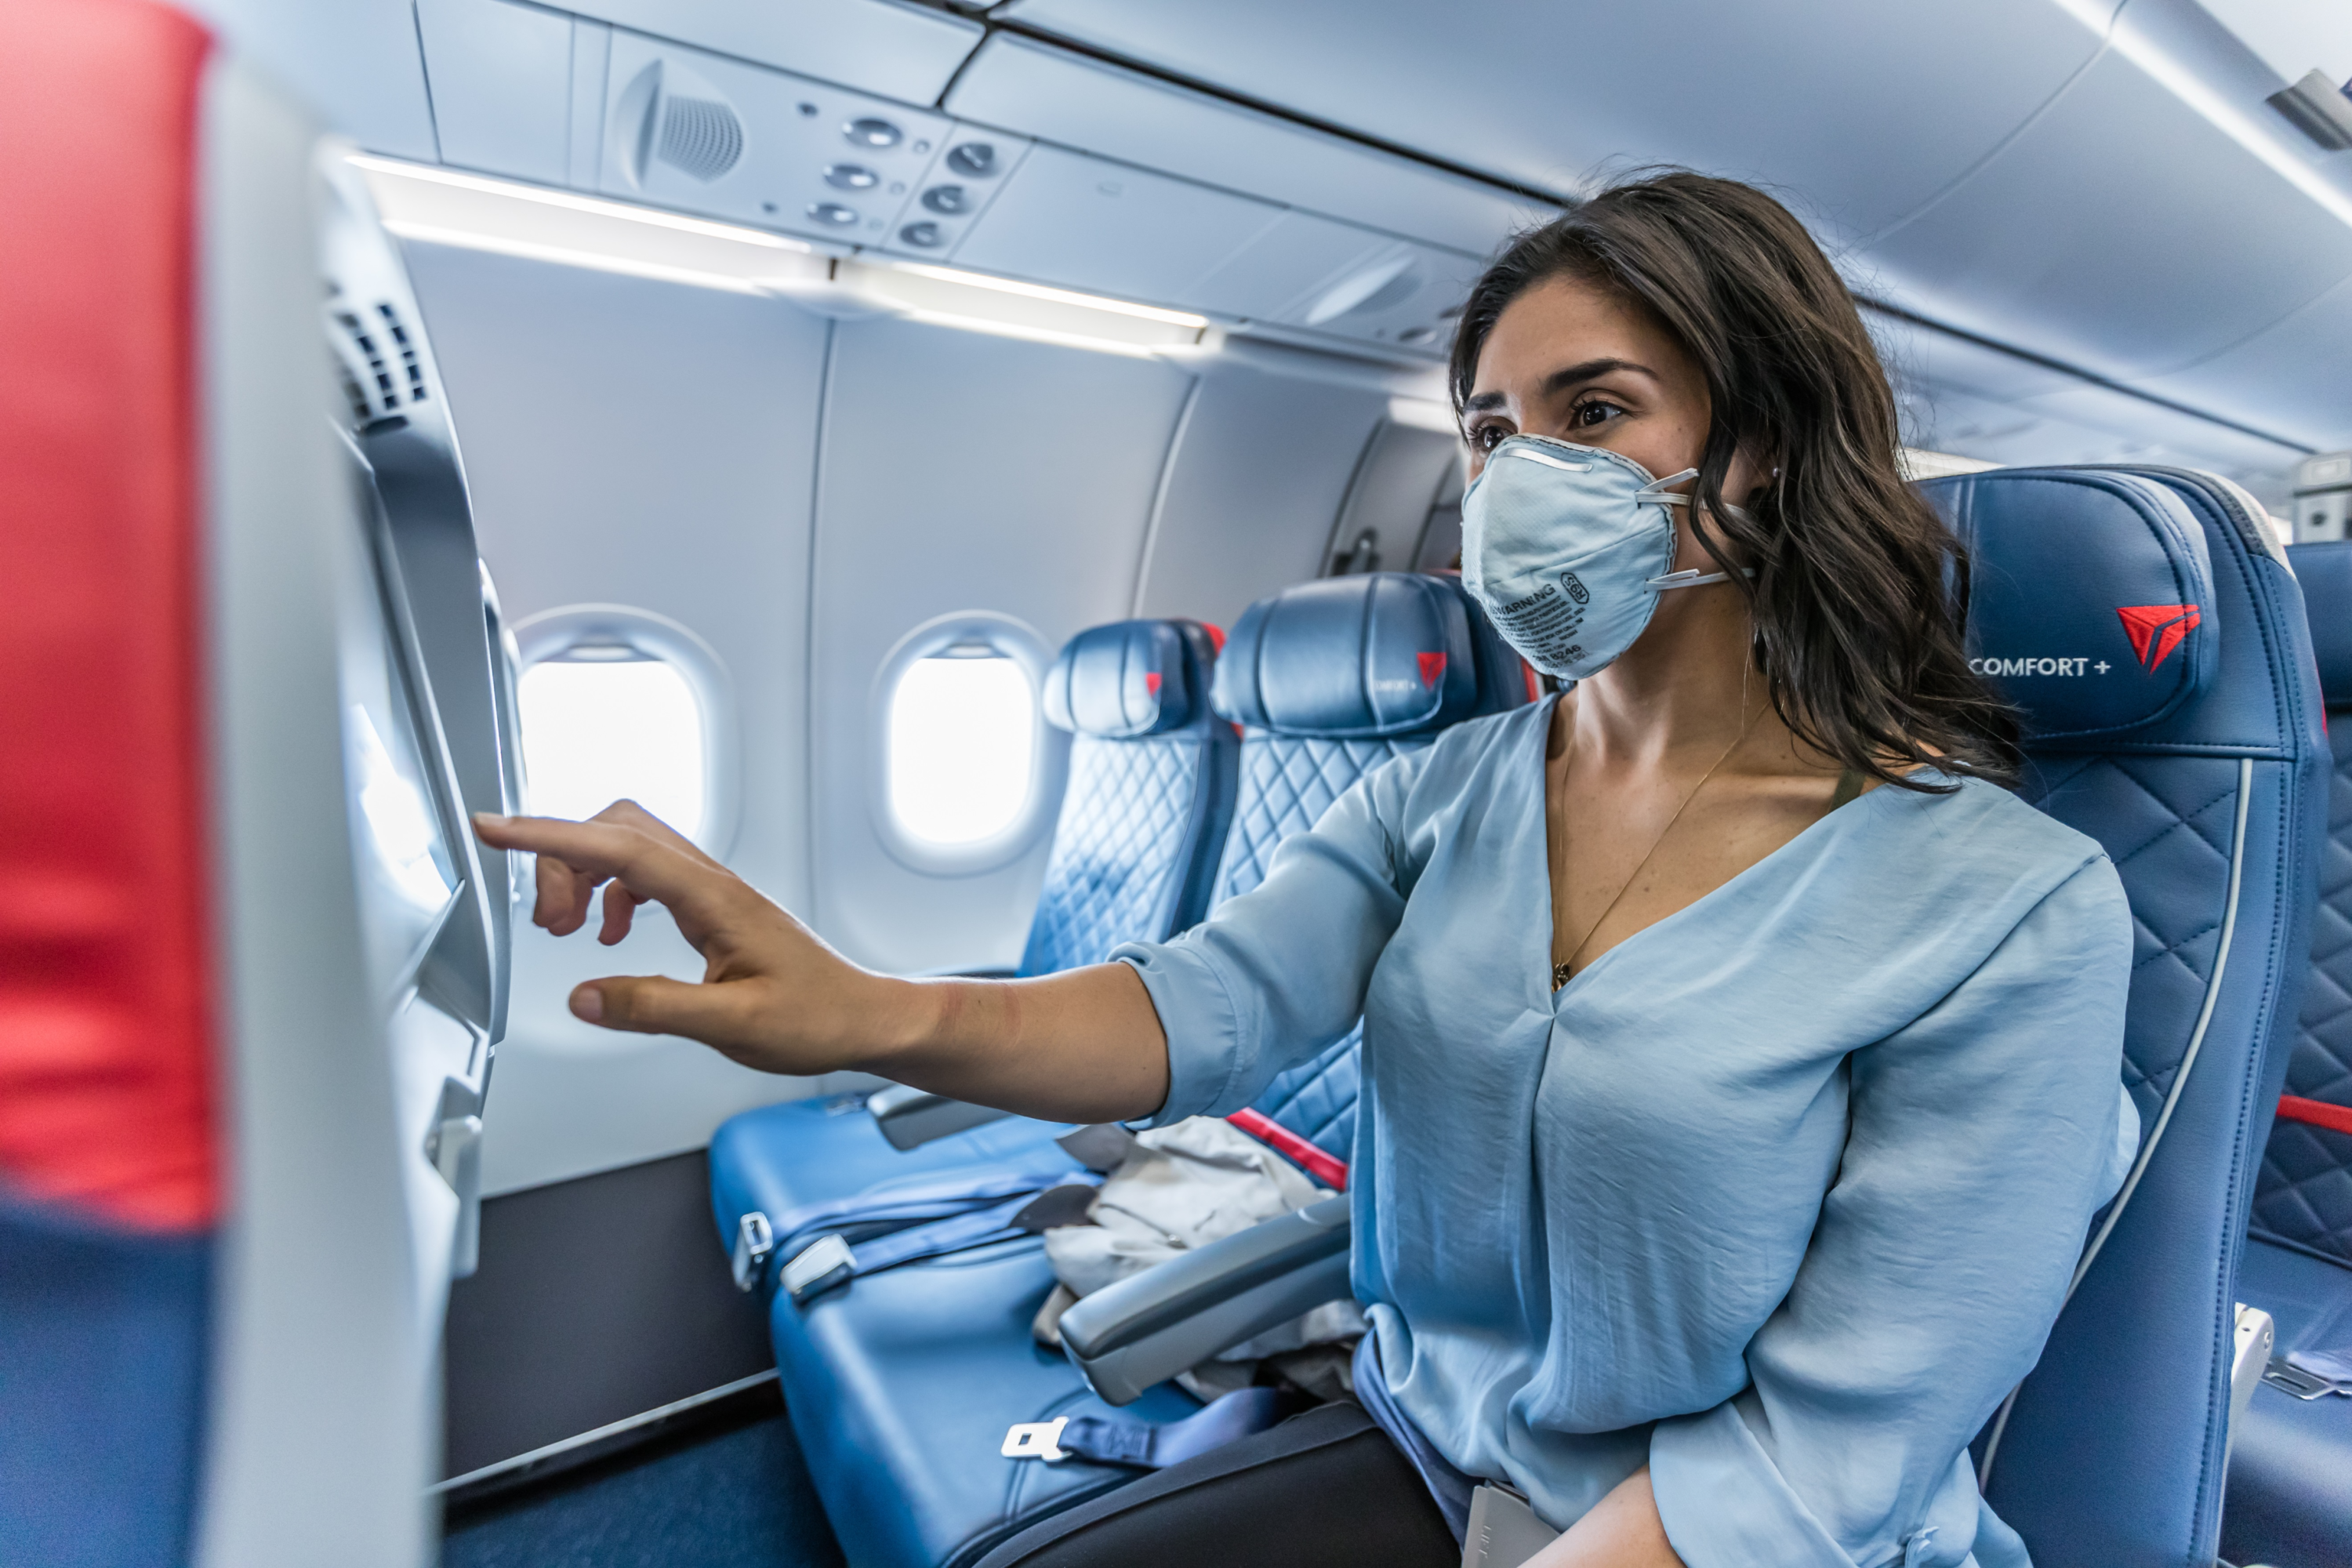 Woman wearing a face mask flying Delta